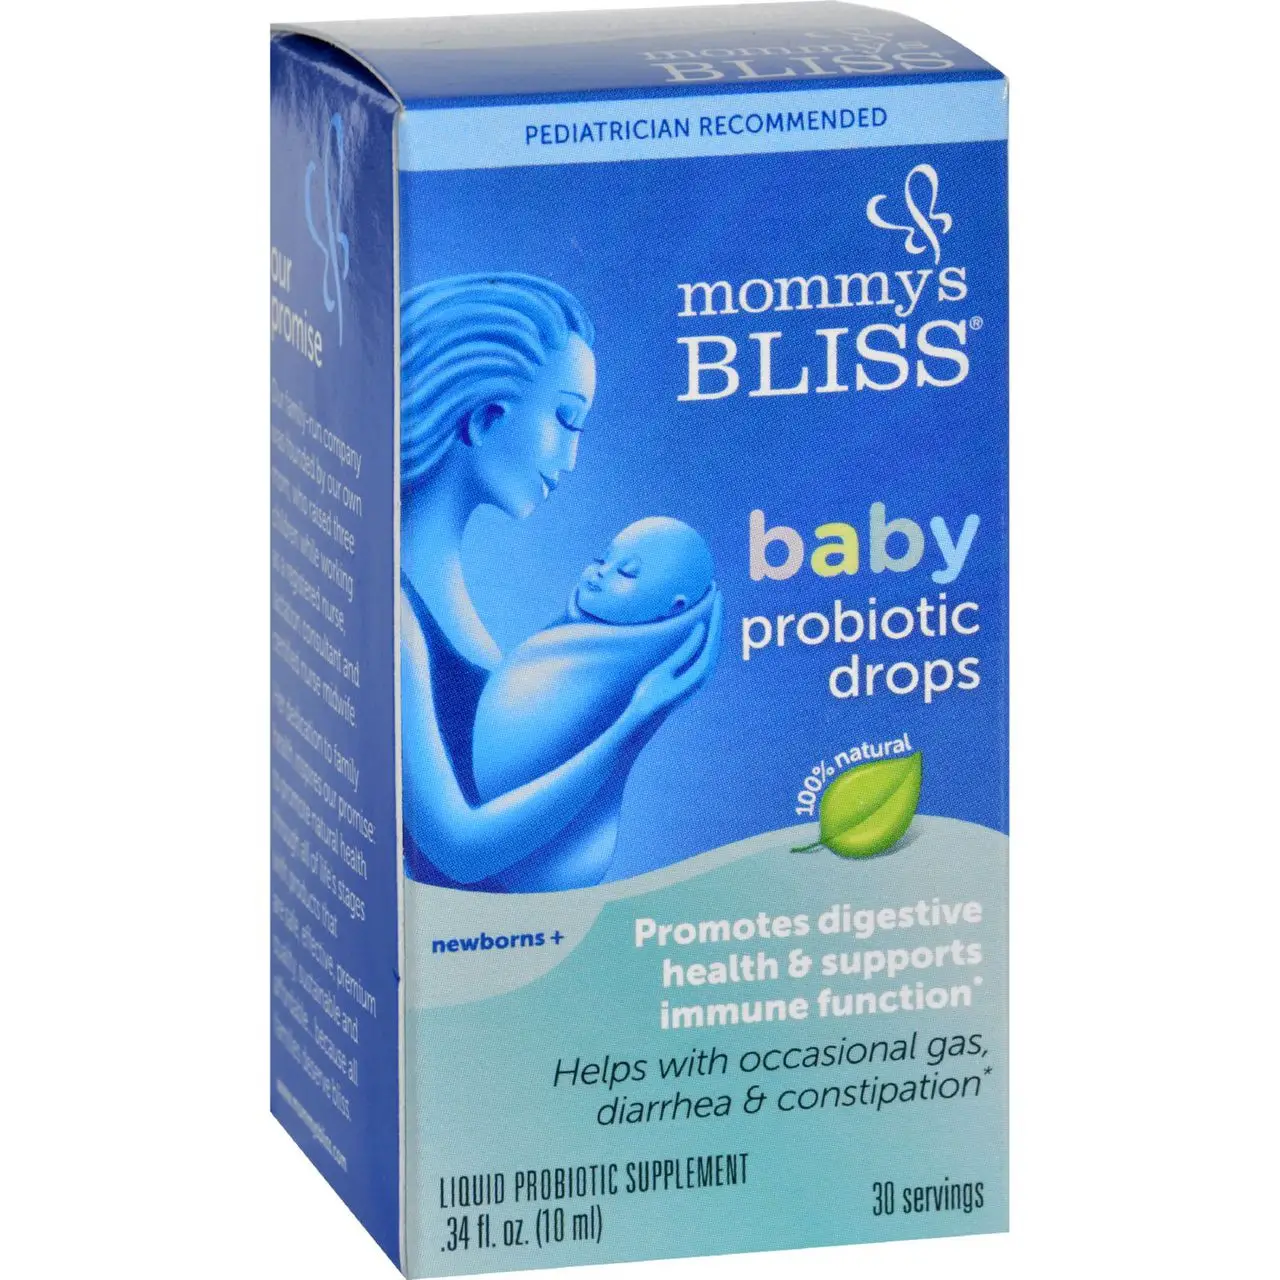 Mommys Bliss Probiotic Drops Baby .34 oz, ECW1718501, 679234000000 ...